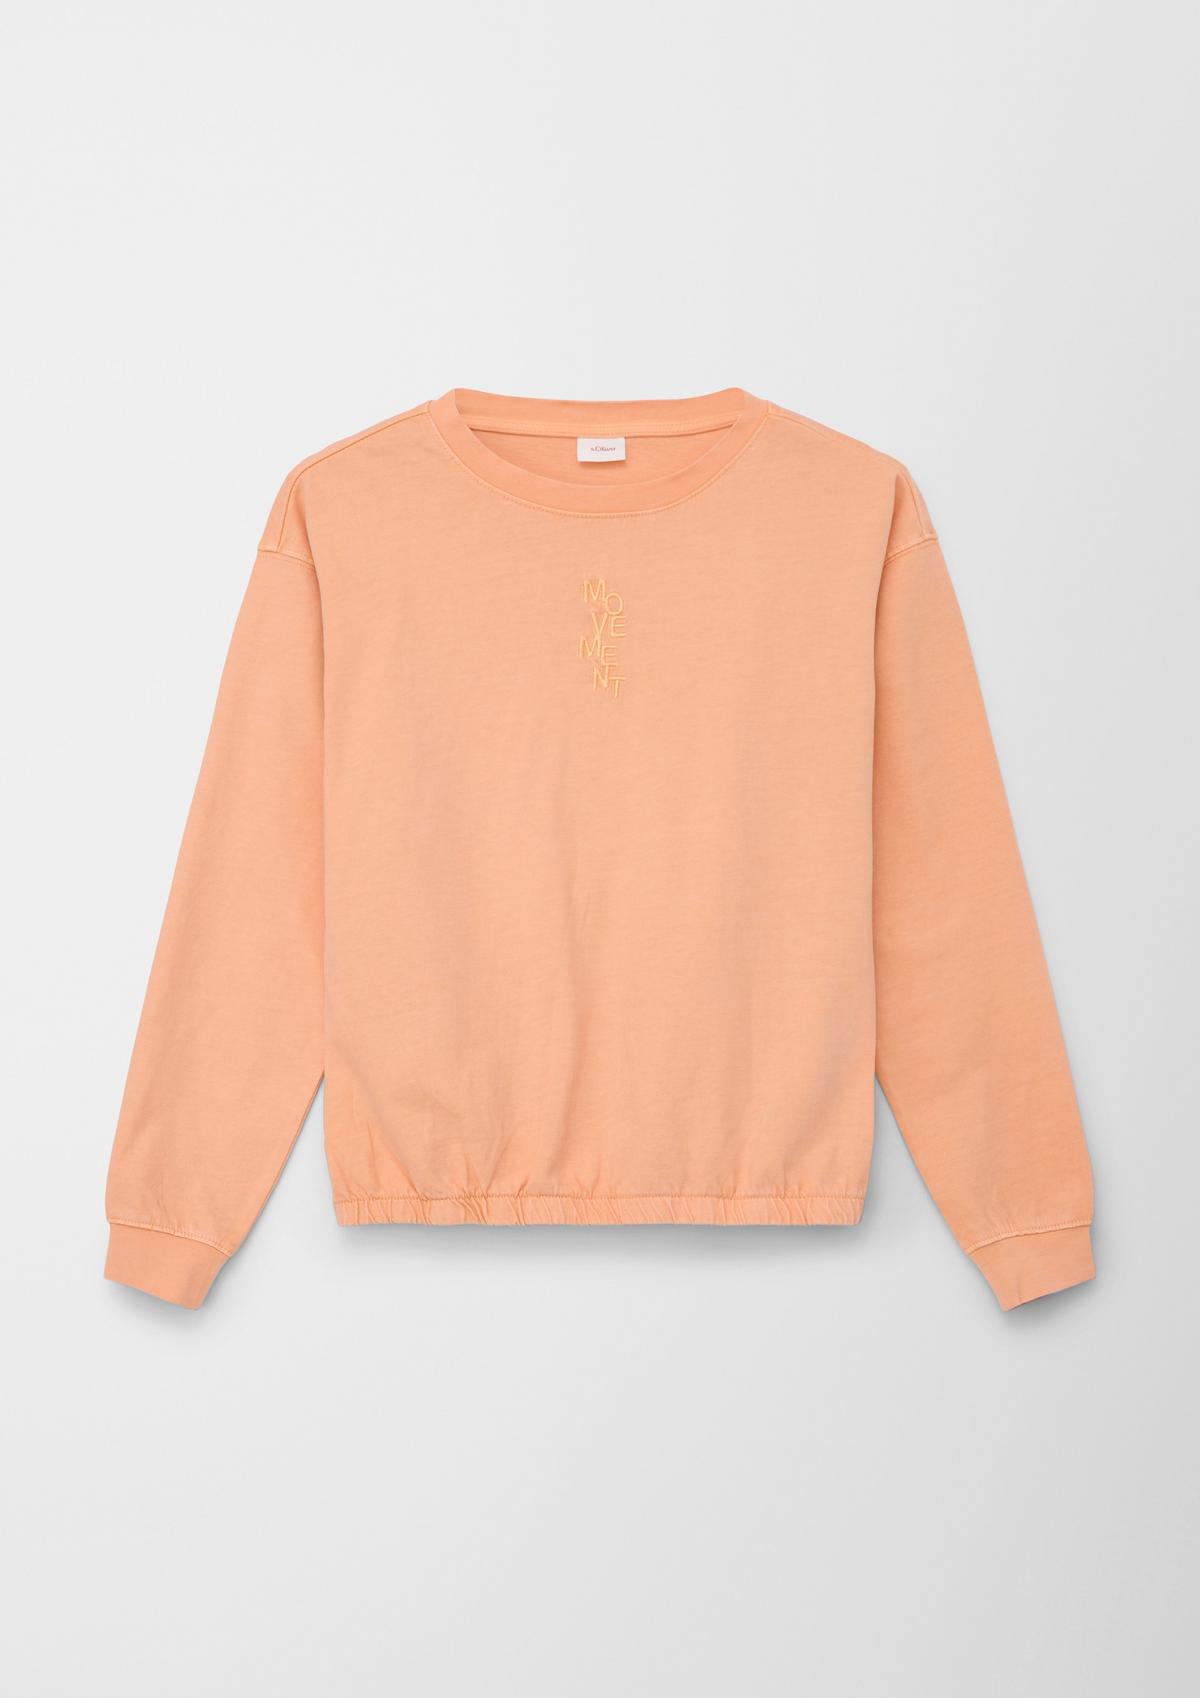 s.Oliver Long sleeve top with embroidery on the front